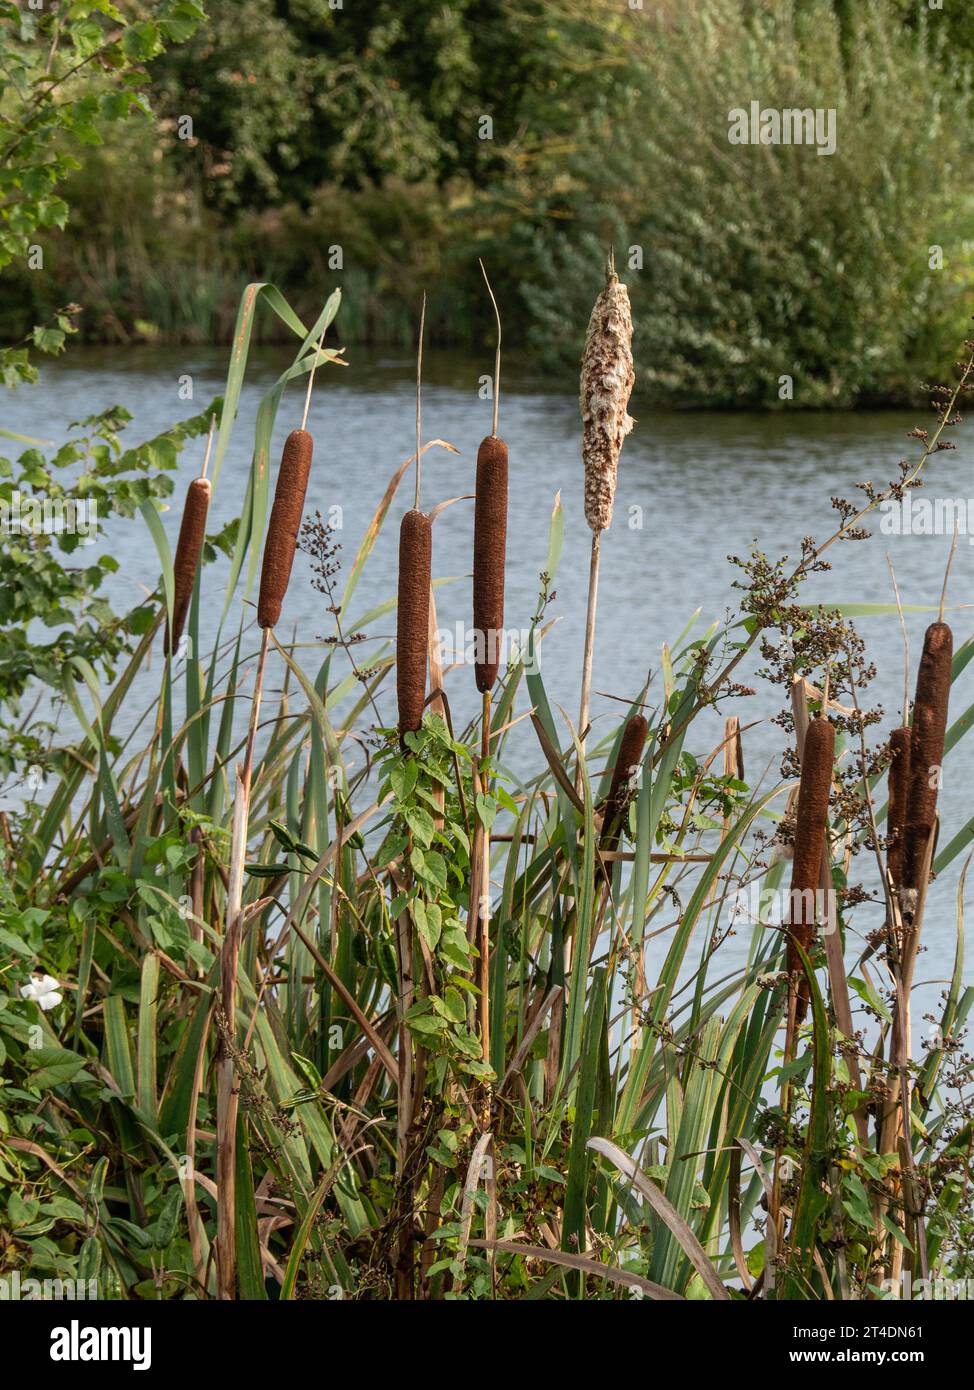 A group of Bulrushs growing on the edge of a lake in Herefordshire Stock Photo